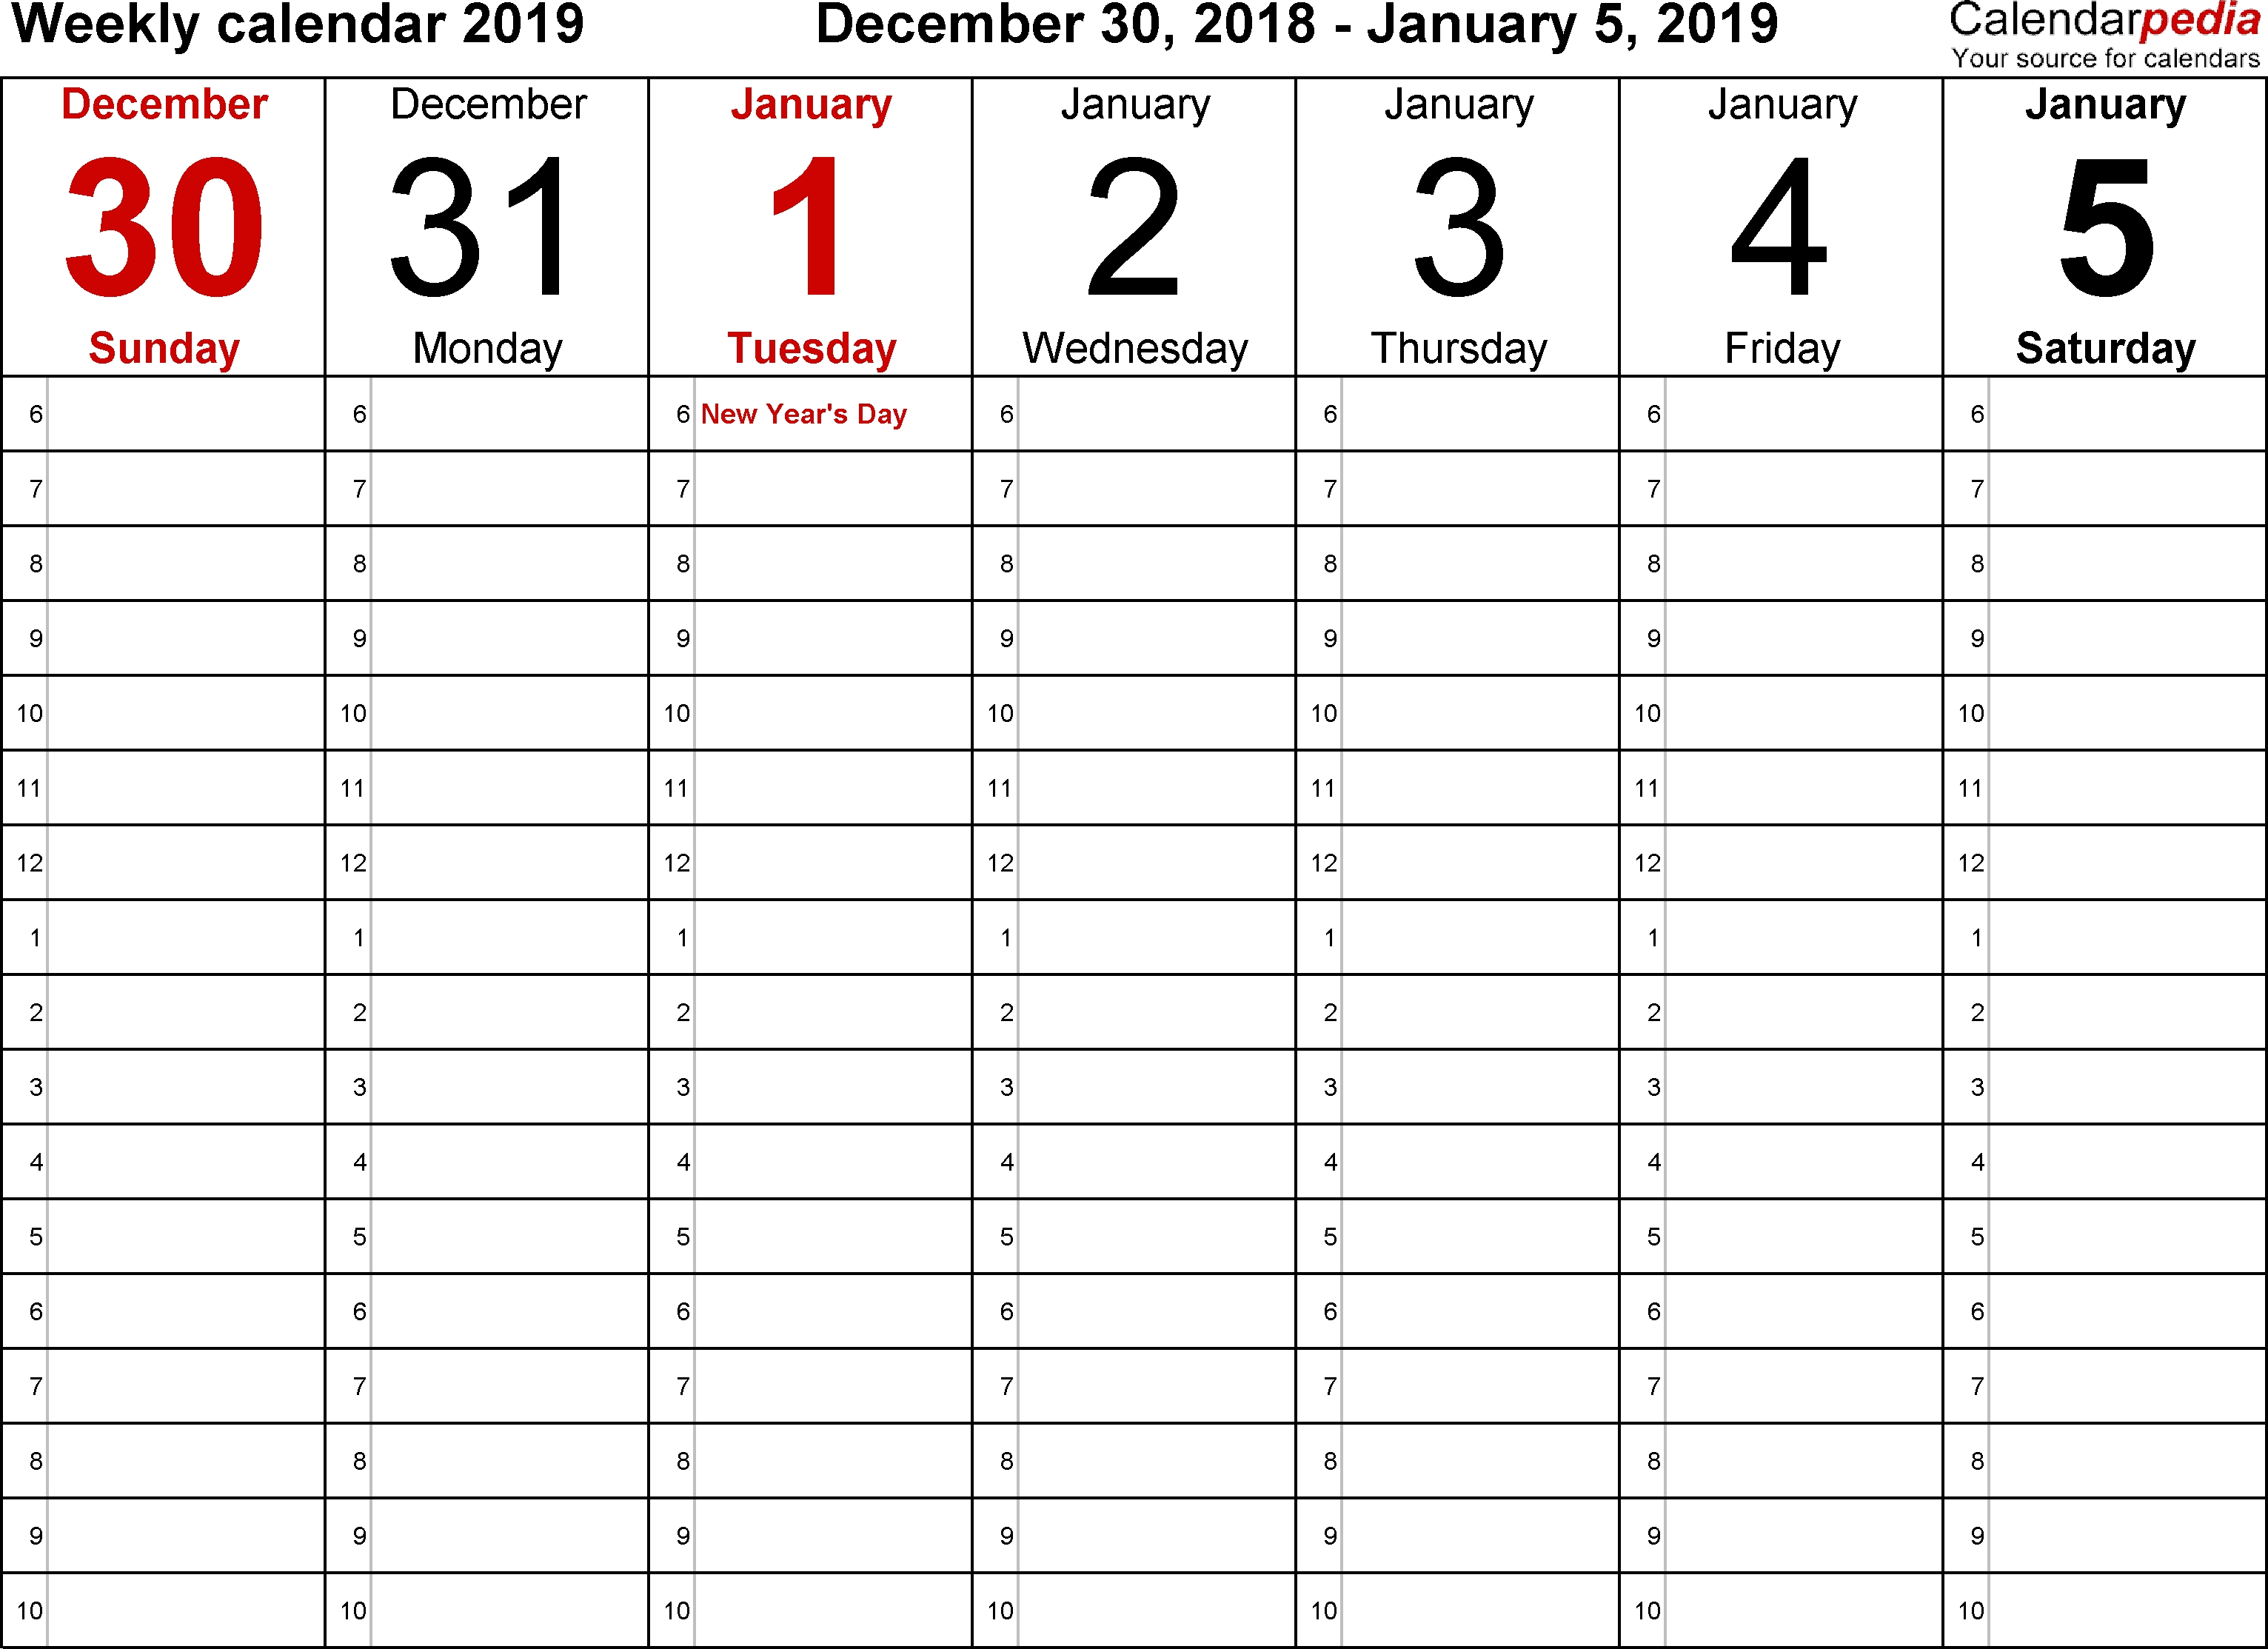 Weekly Calendar 2019 For Word - 12 Free Printable Templates throughout Blank Monday Through Friday Weekly Calendar Without Download